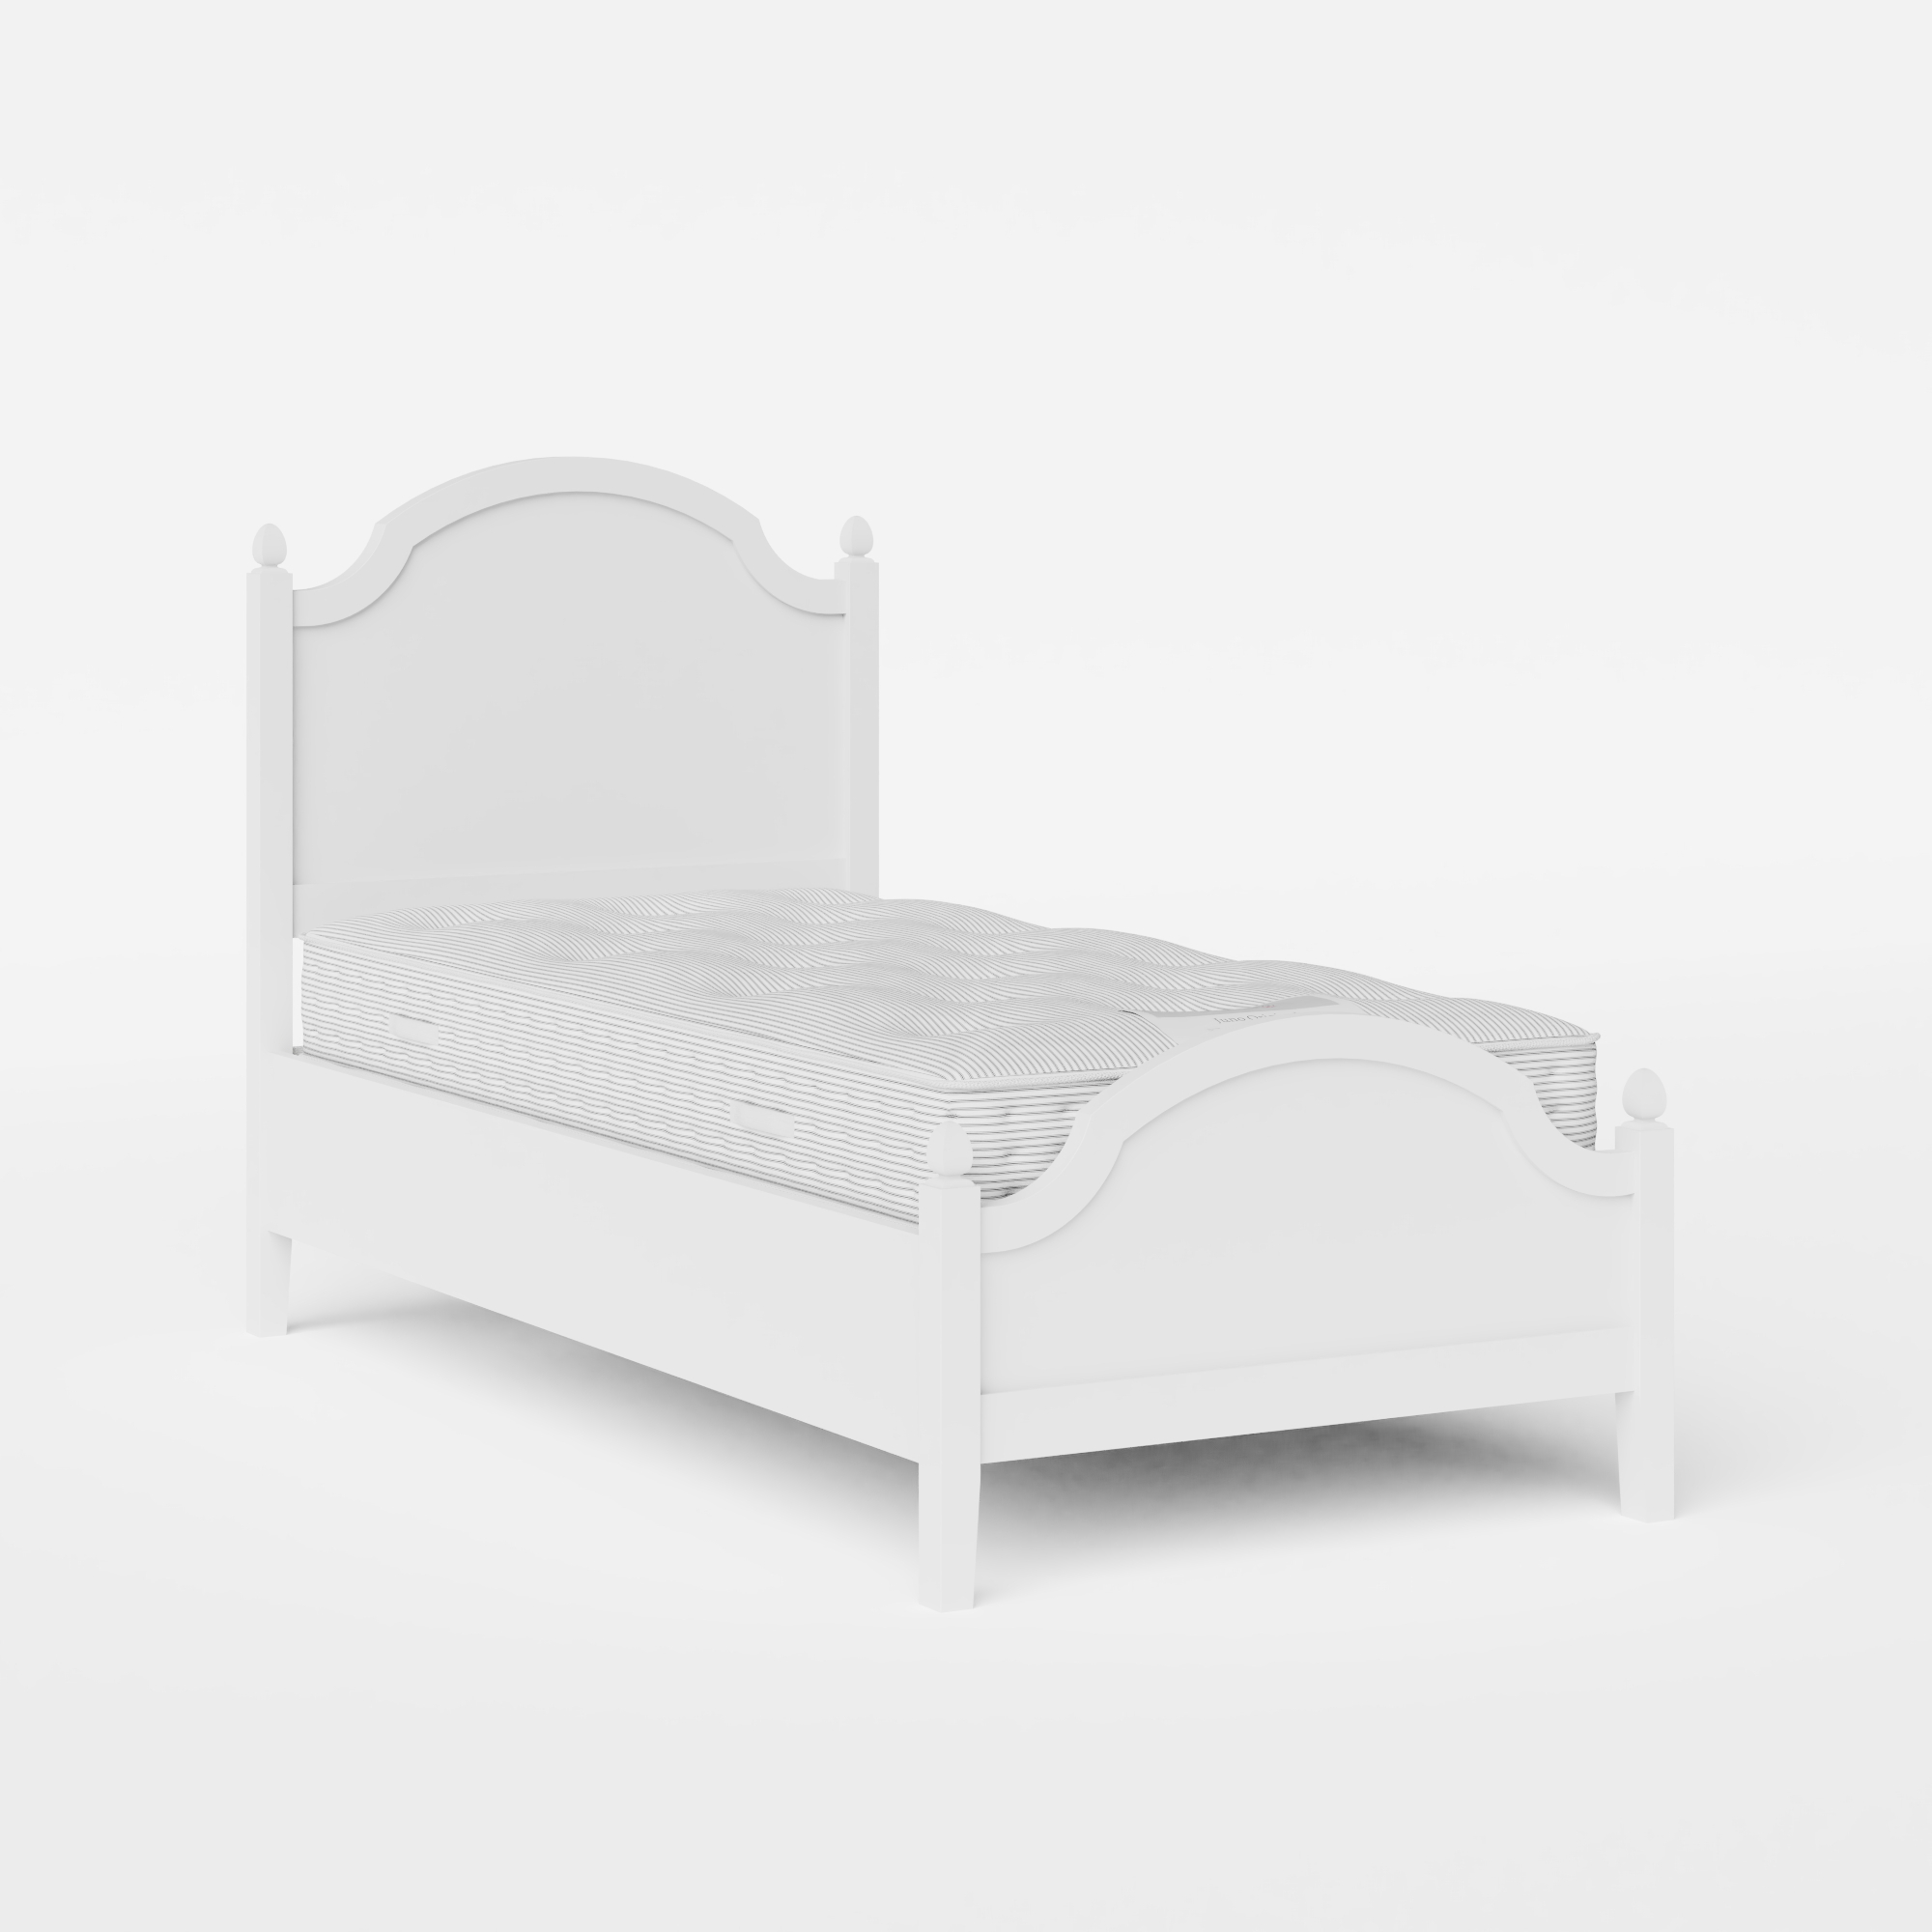 Kipling Low Footend Painted single painted wood bed in white with Juno mattress